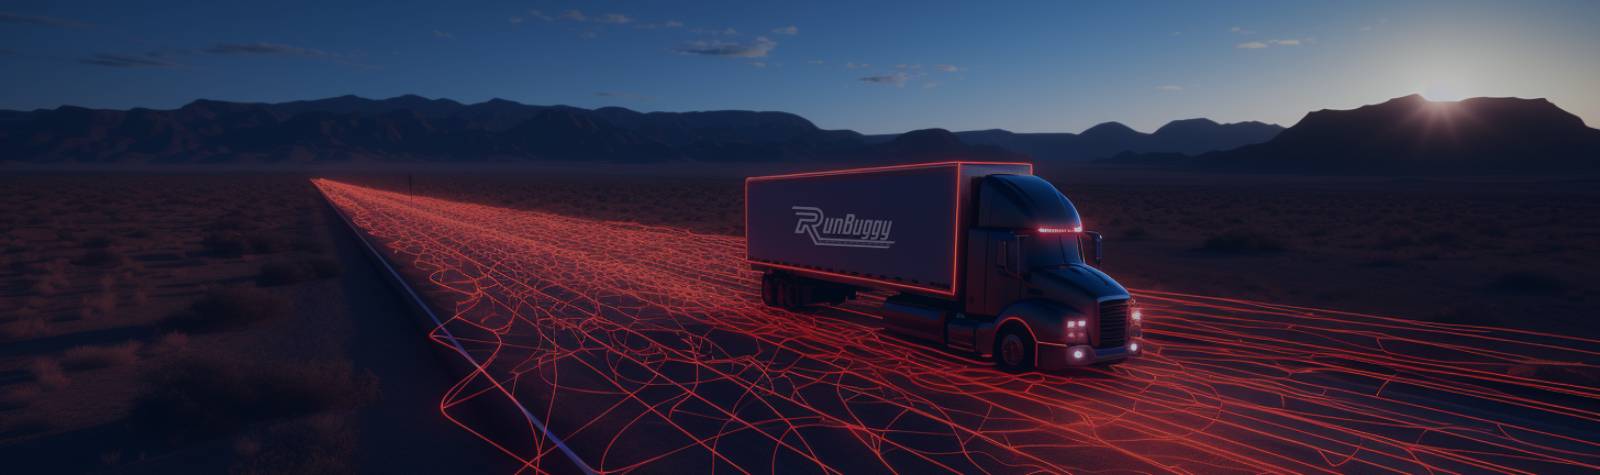 RunBuggy’s New AI-Powered Routing System